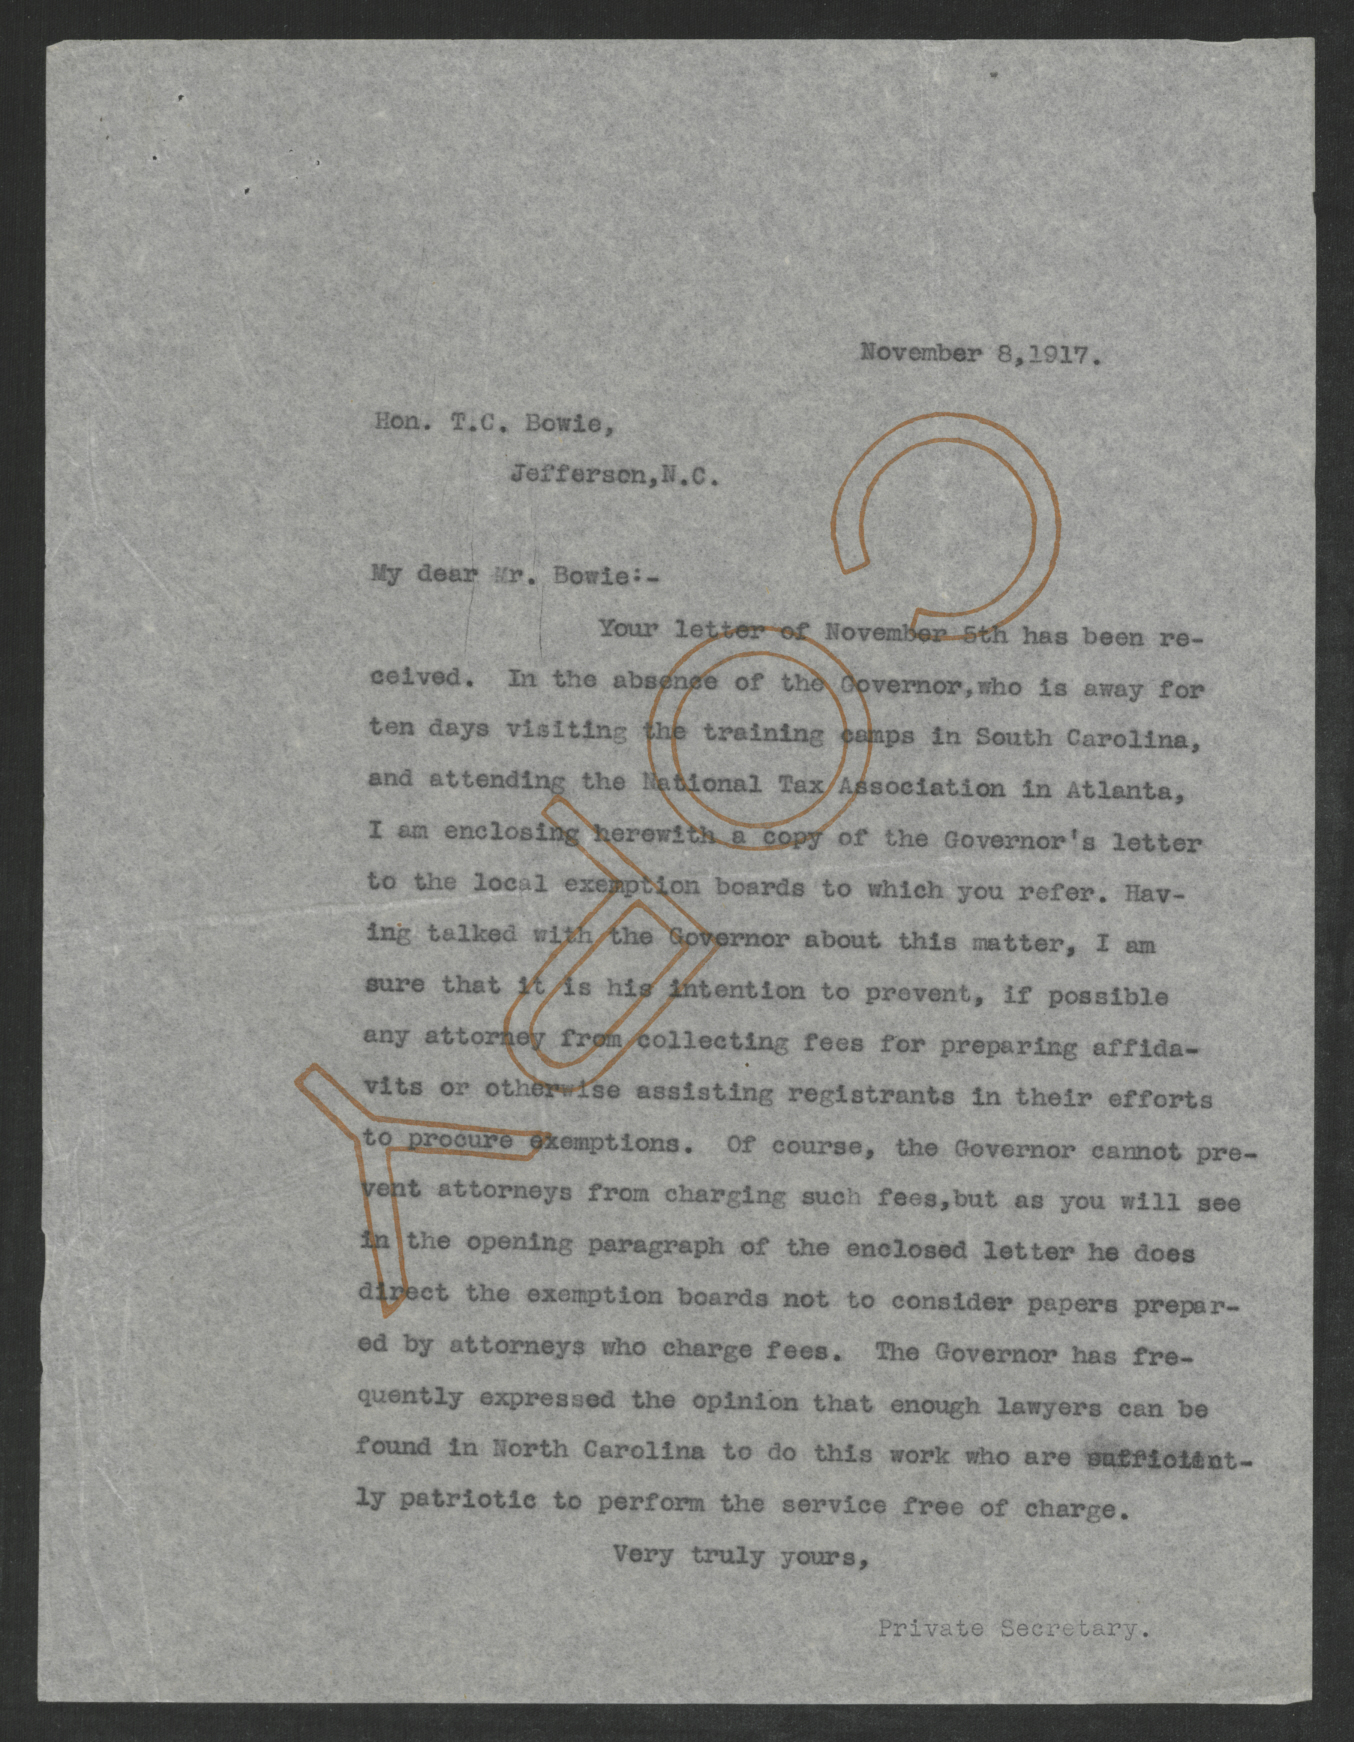 Letter from Santford Martin to Thomas C. Bowie, November 8, 1917